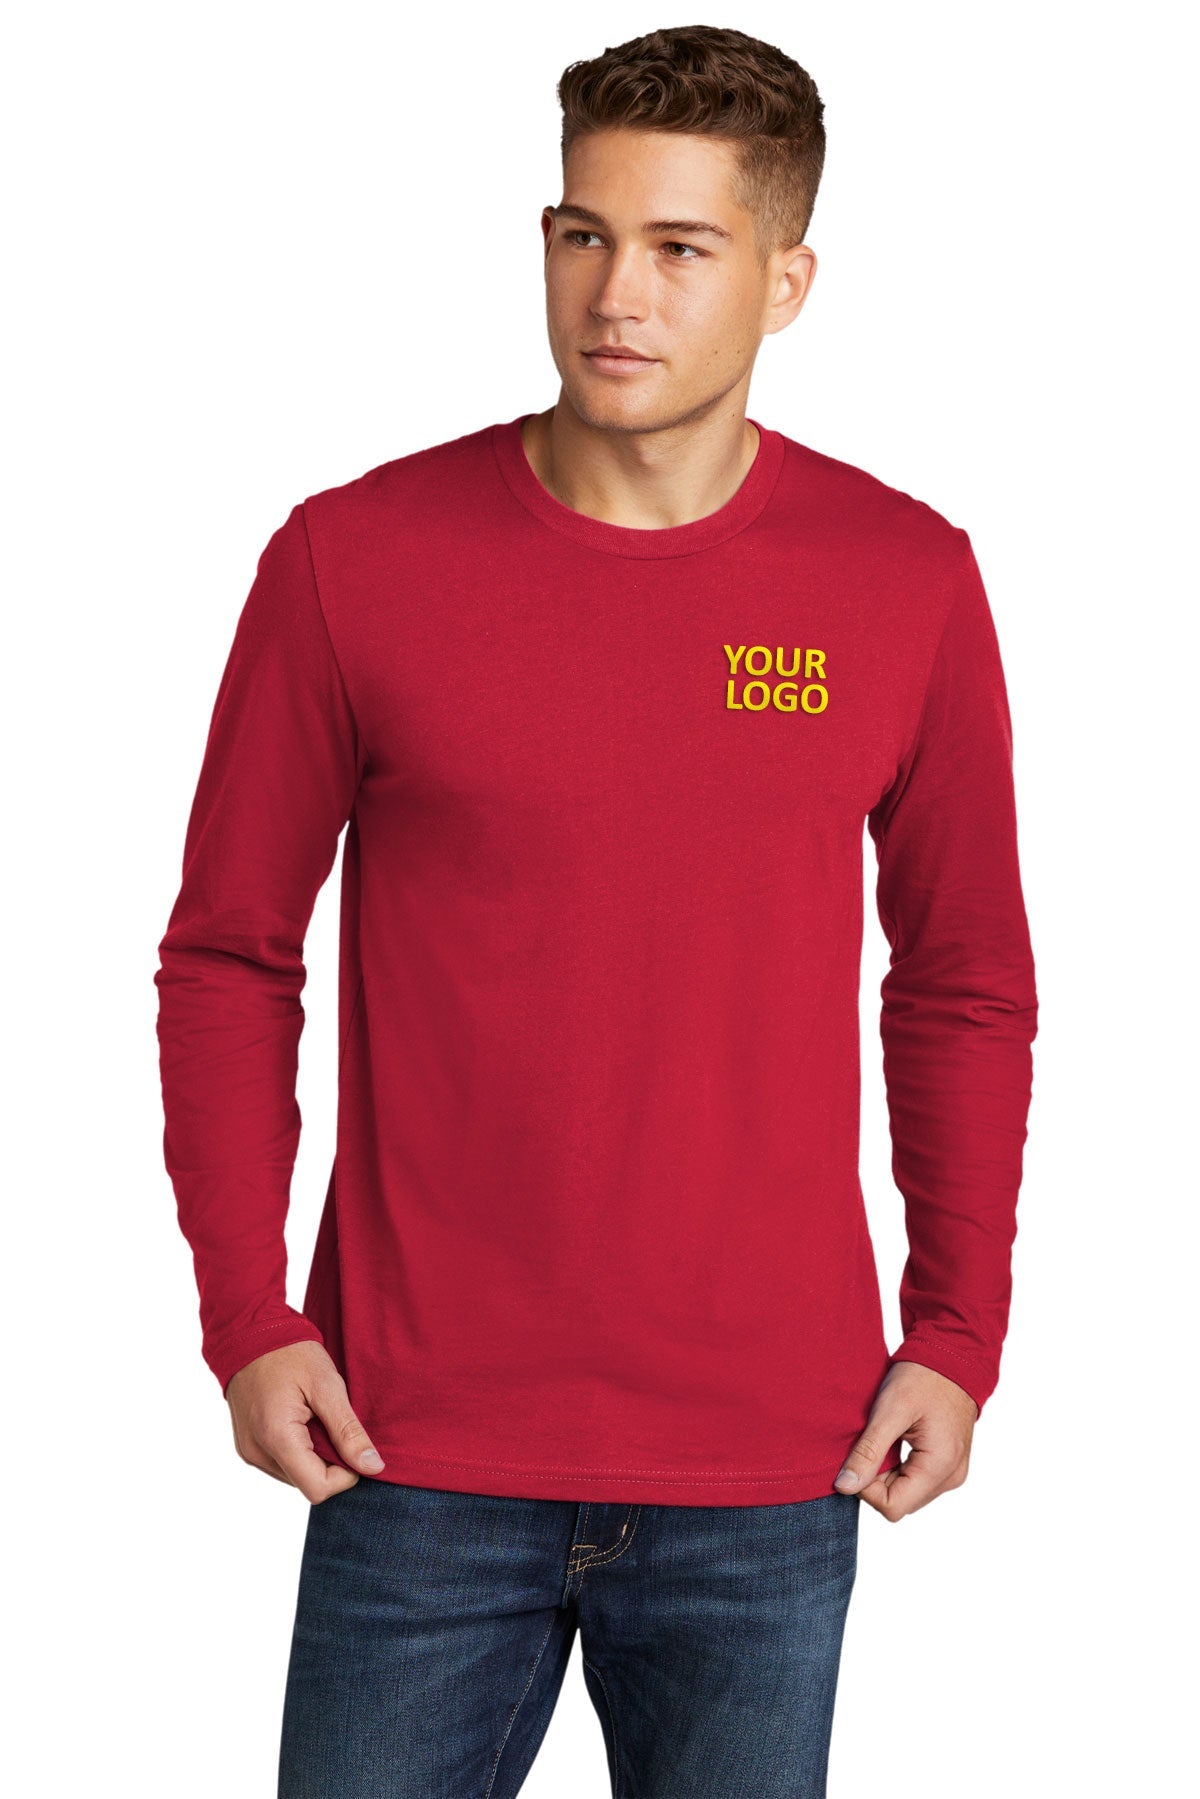 Next Level Cotton Long Sleeve Tee NL3601 Red